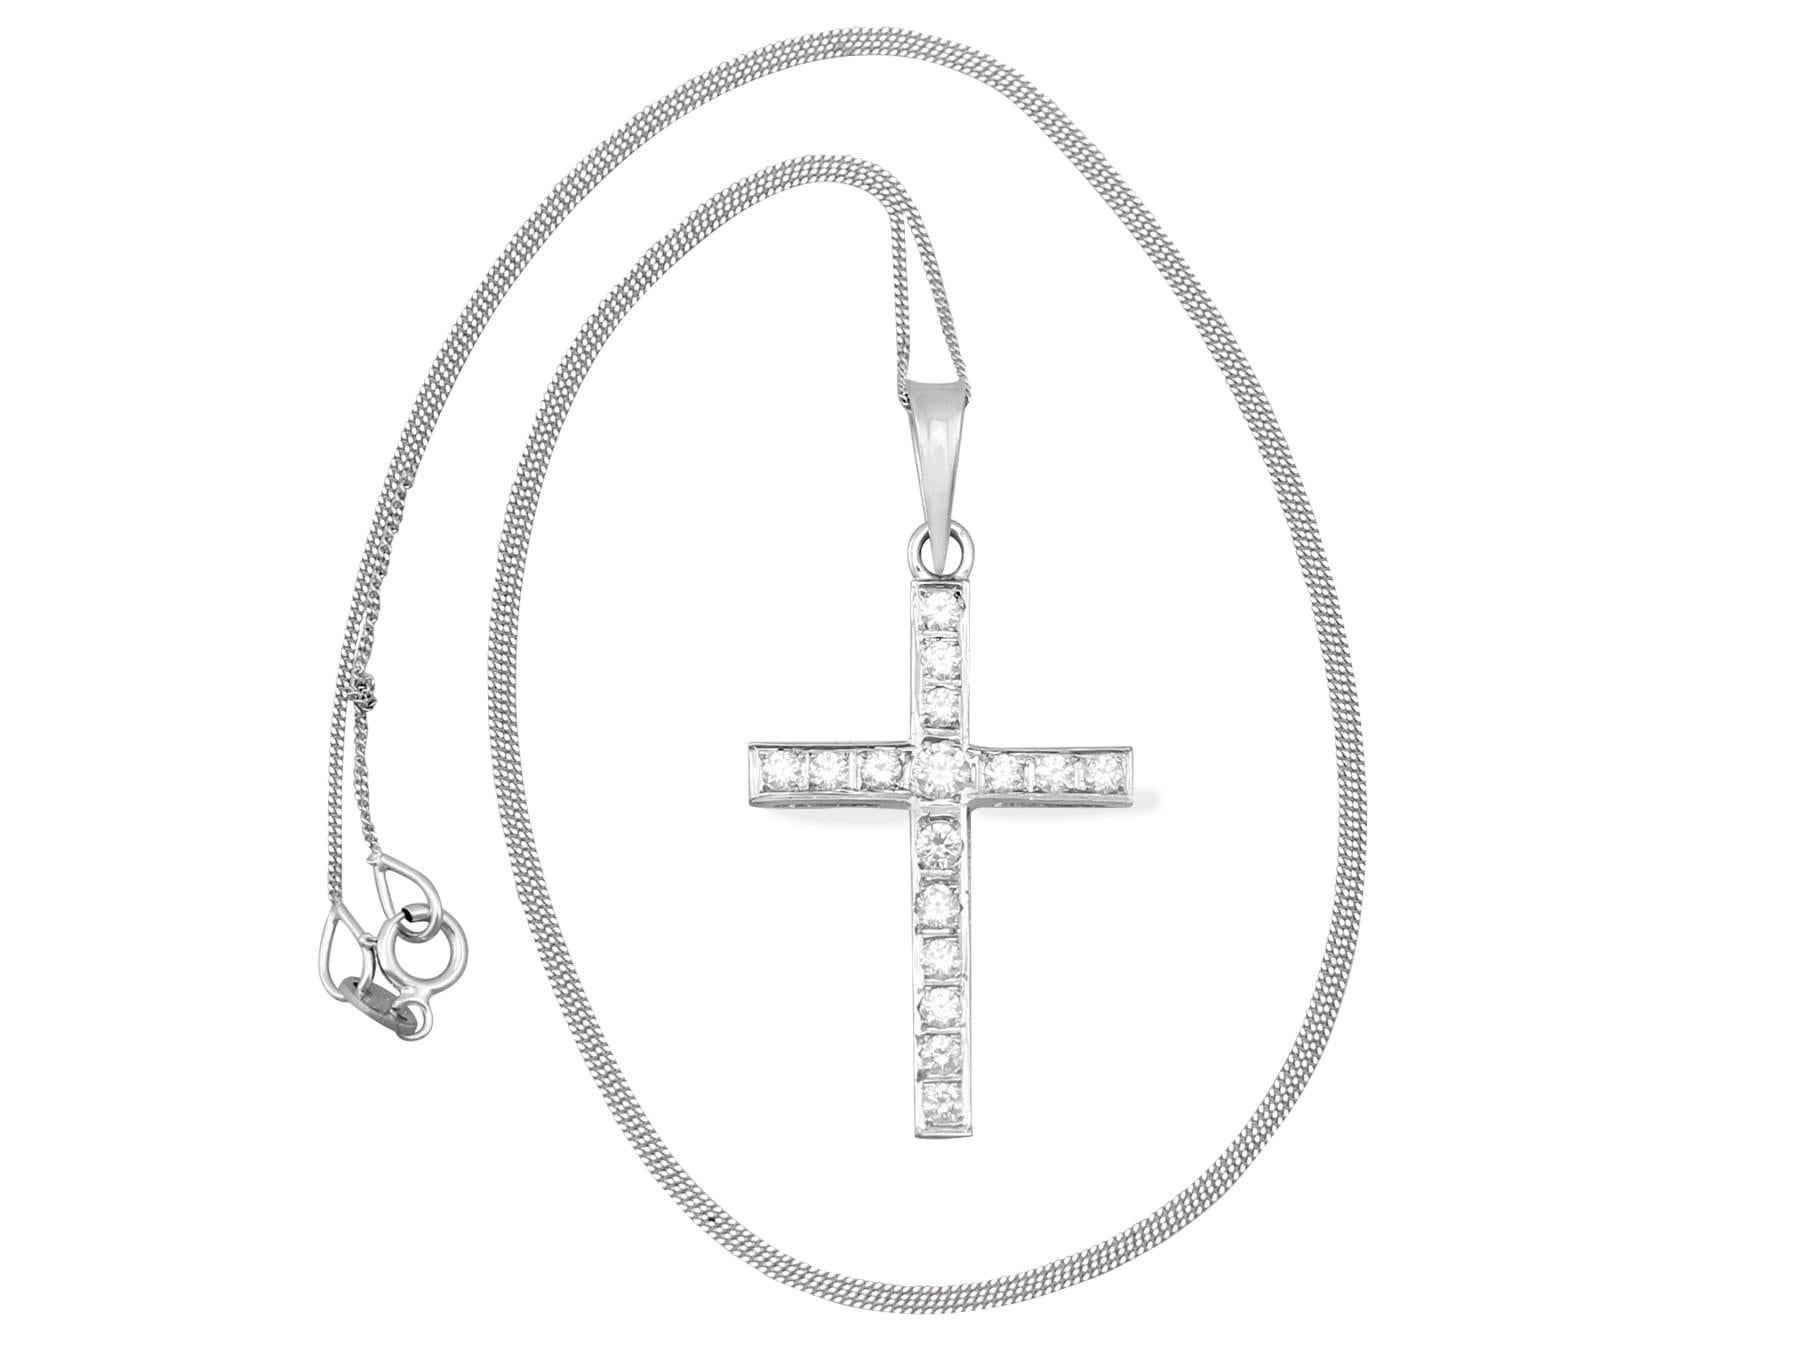 An impressive vintage 1950s 0.60Ct diamond and 18k white gold cross pendant and chain; part of our diverse diamond jewelry and estate jewelry collections.

This fine and impressive vintage diamond cross pendant has been crafted in 18k white